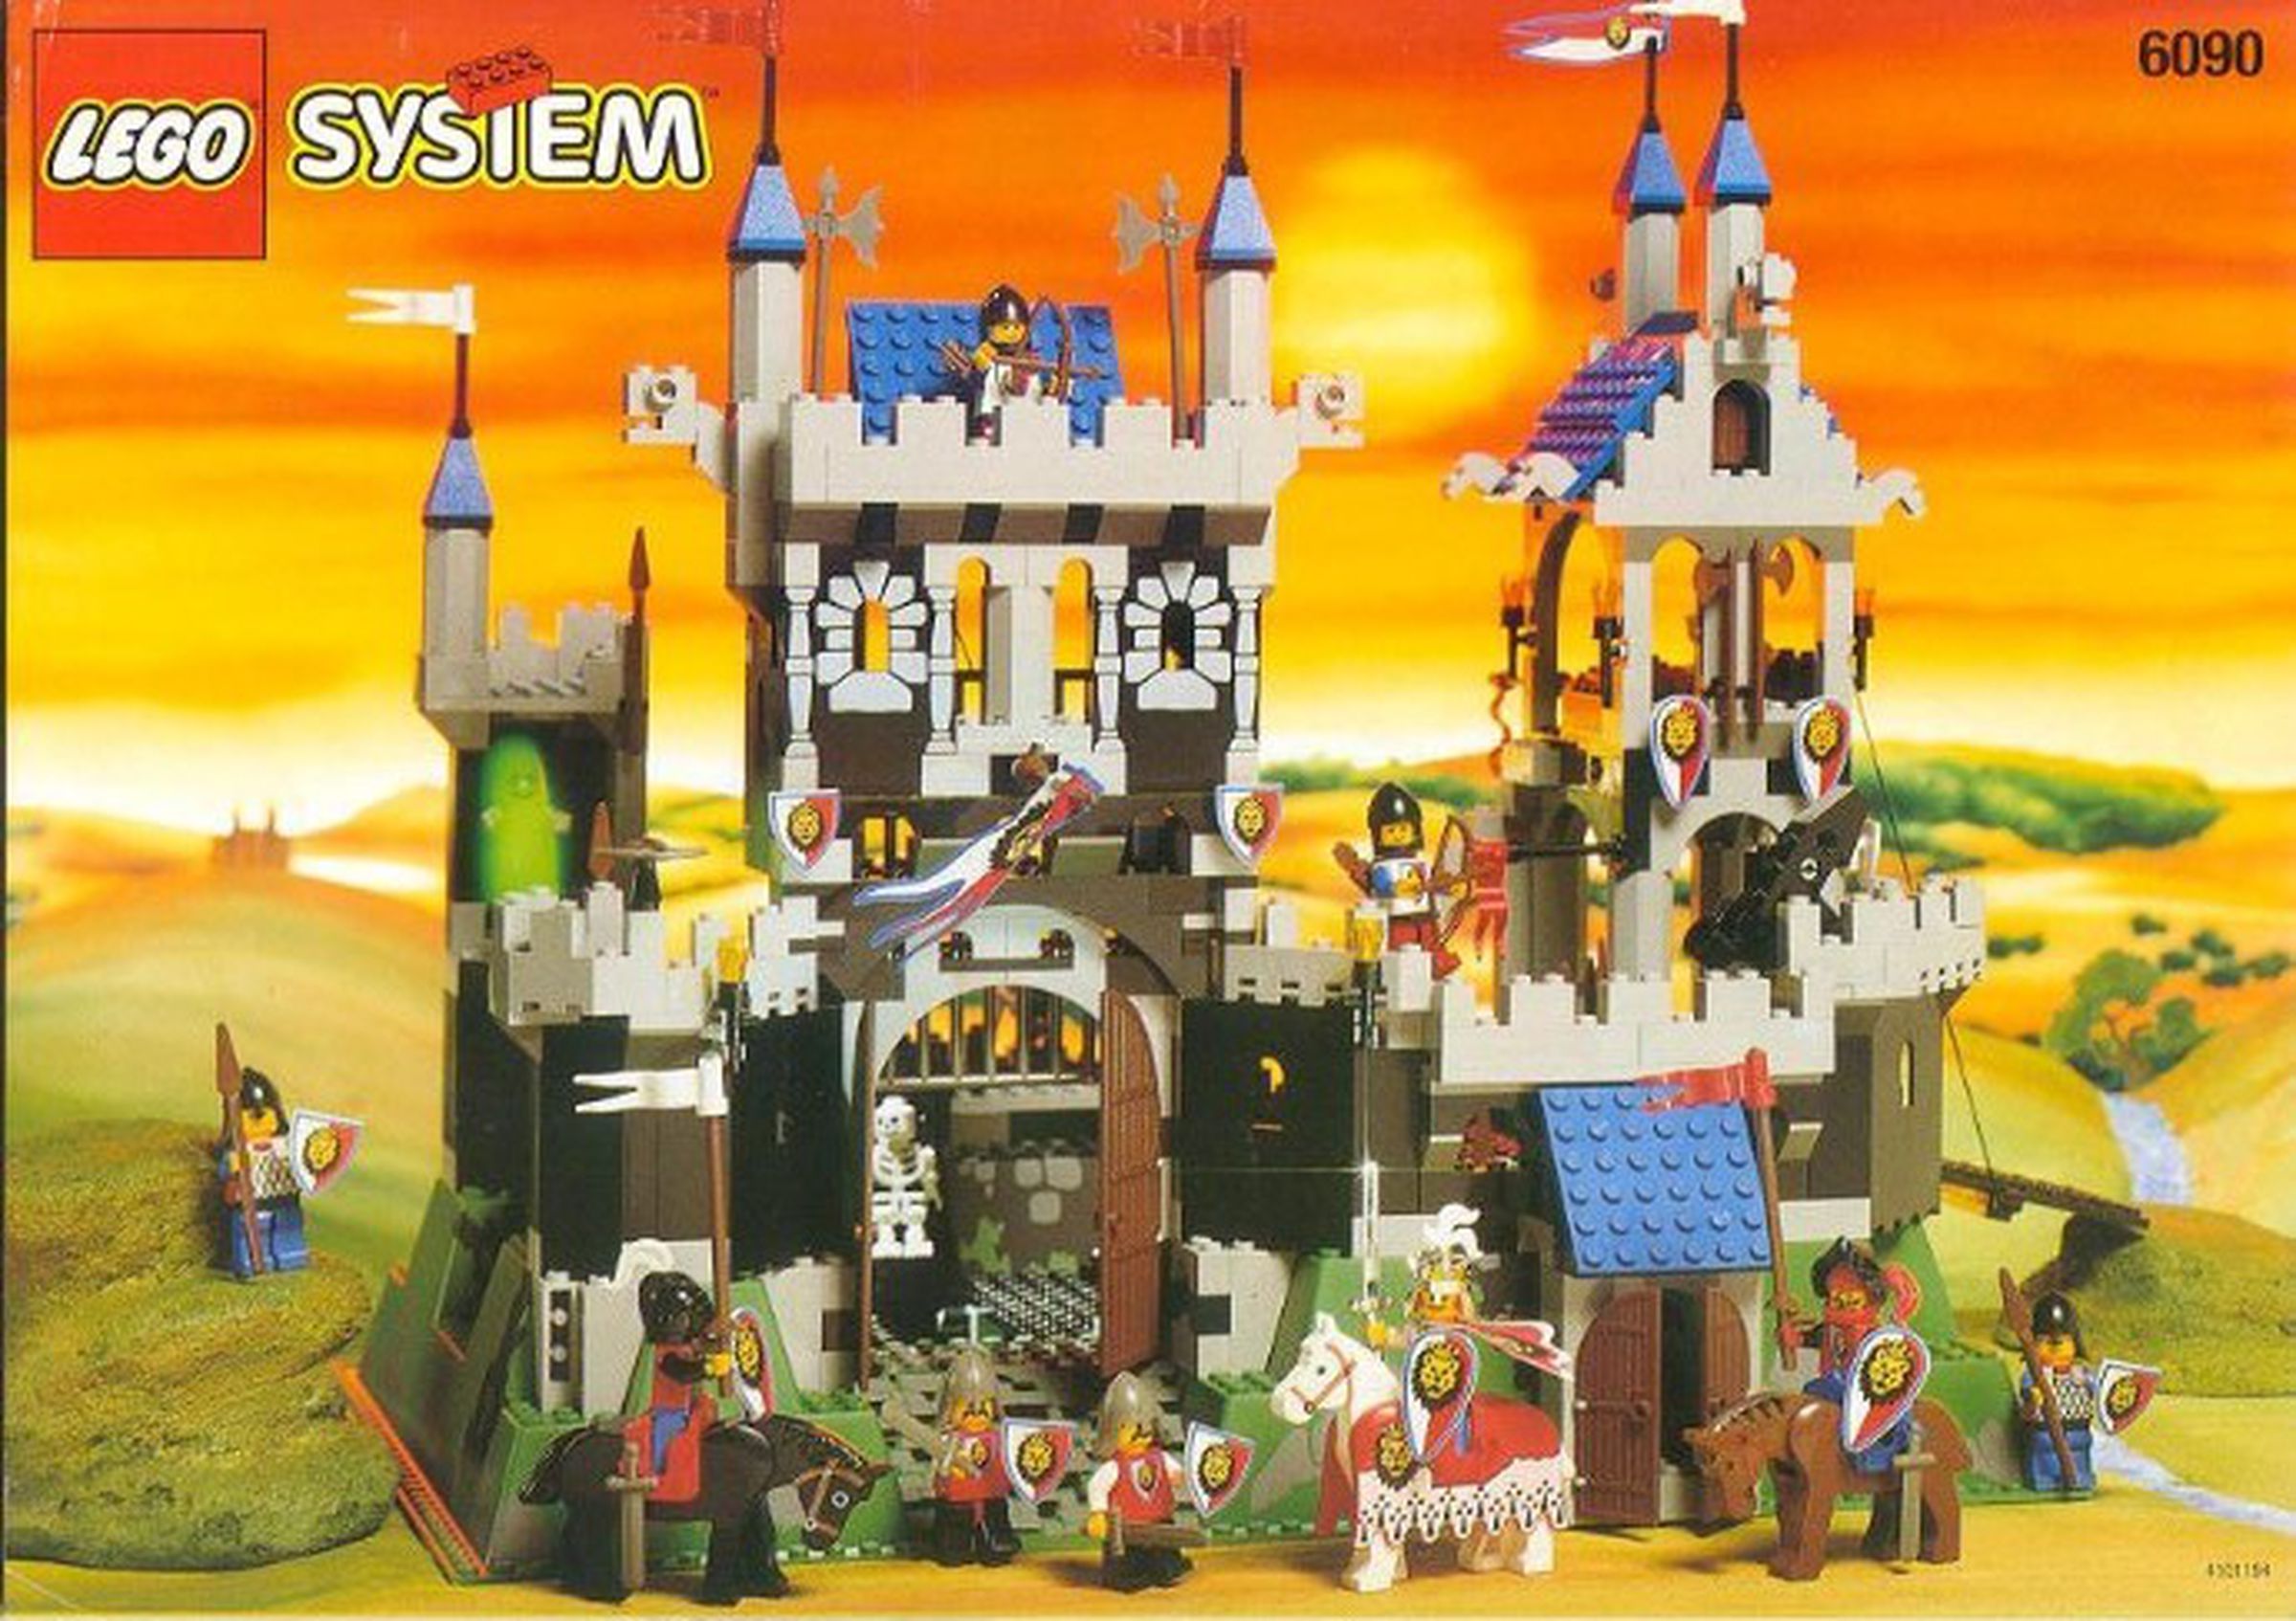 6090 Royal Knight’s Castle. Find the trebuchet just below the tower at upper right.